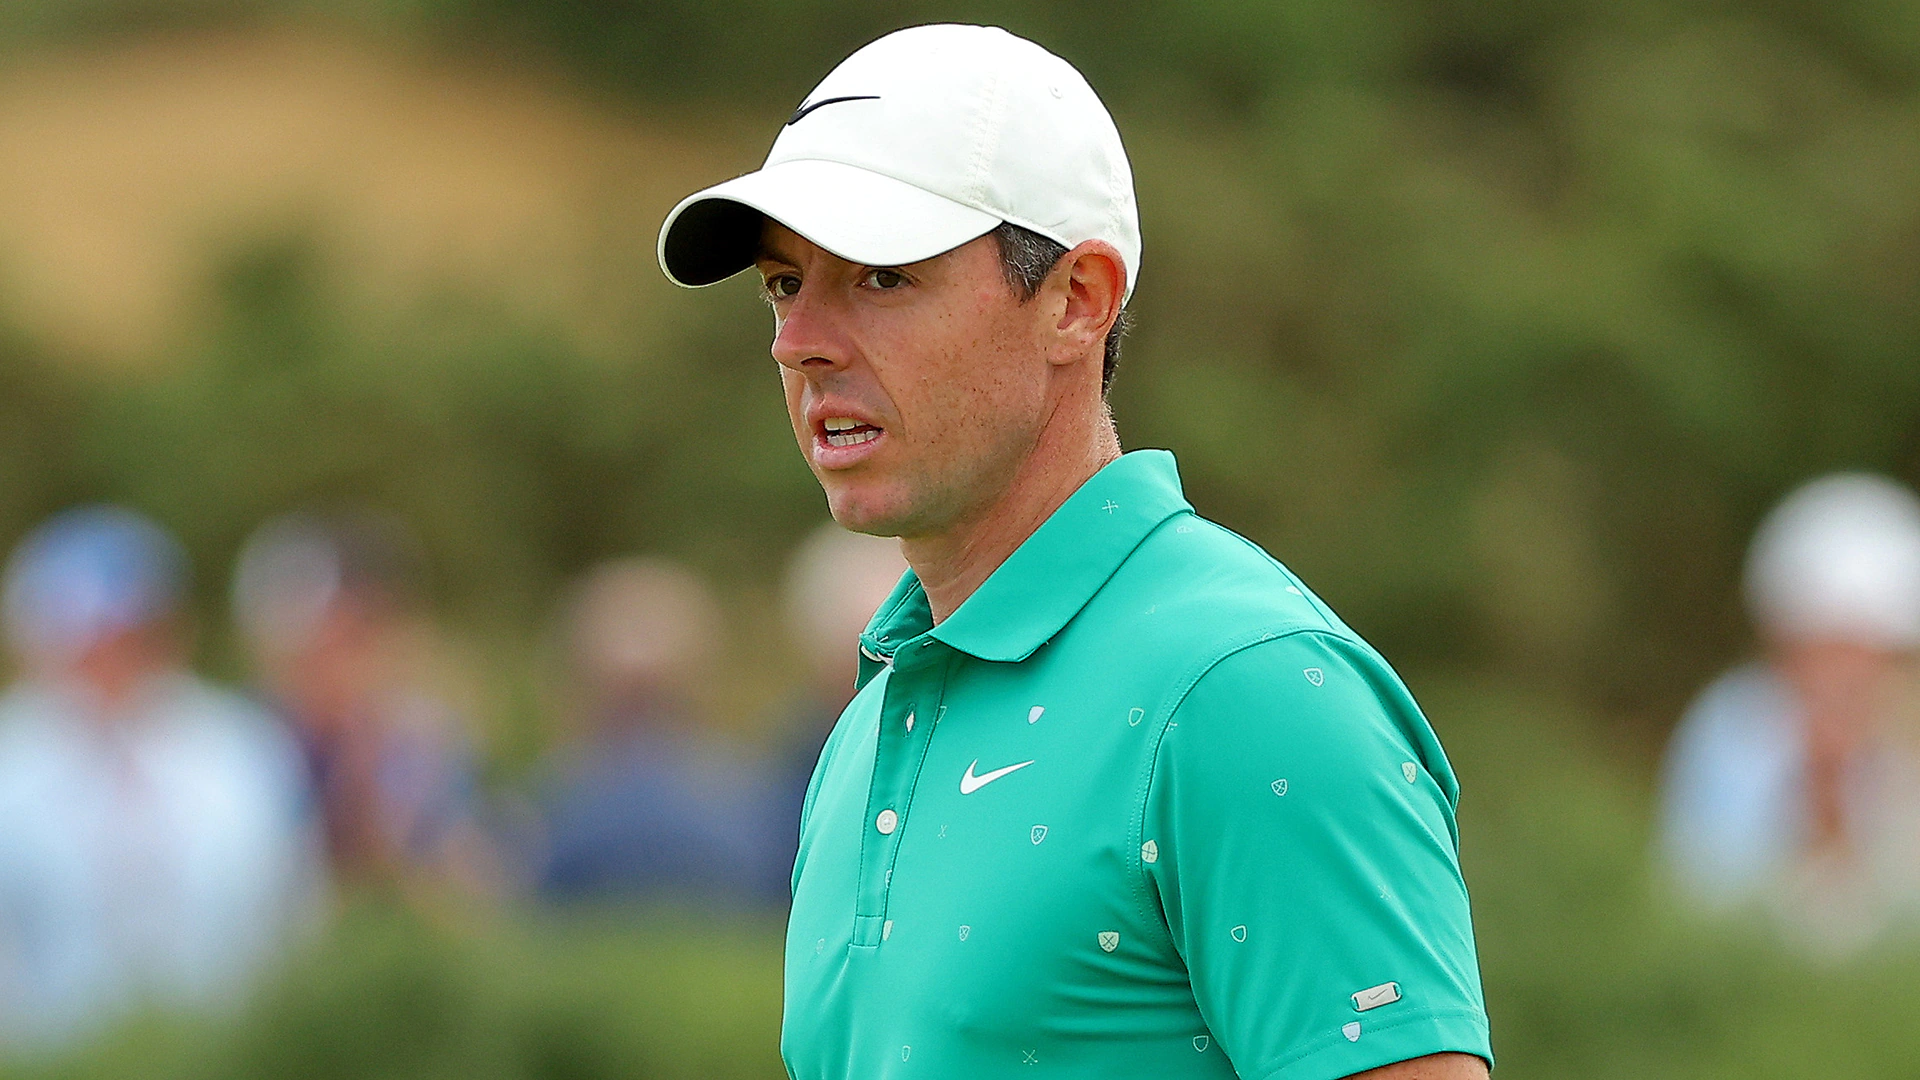 ‘Golf is ripping itself apart right now’: Rory McIlroy open to PGA Tour-LIV Golf truce